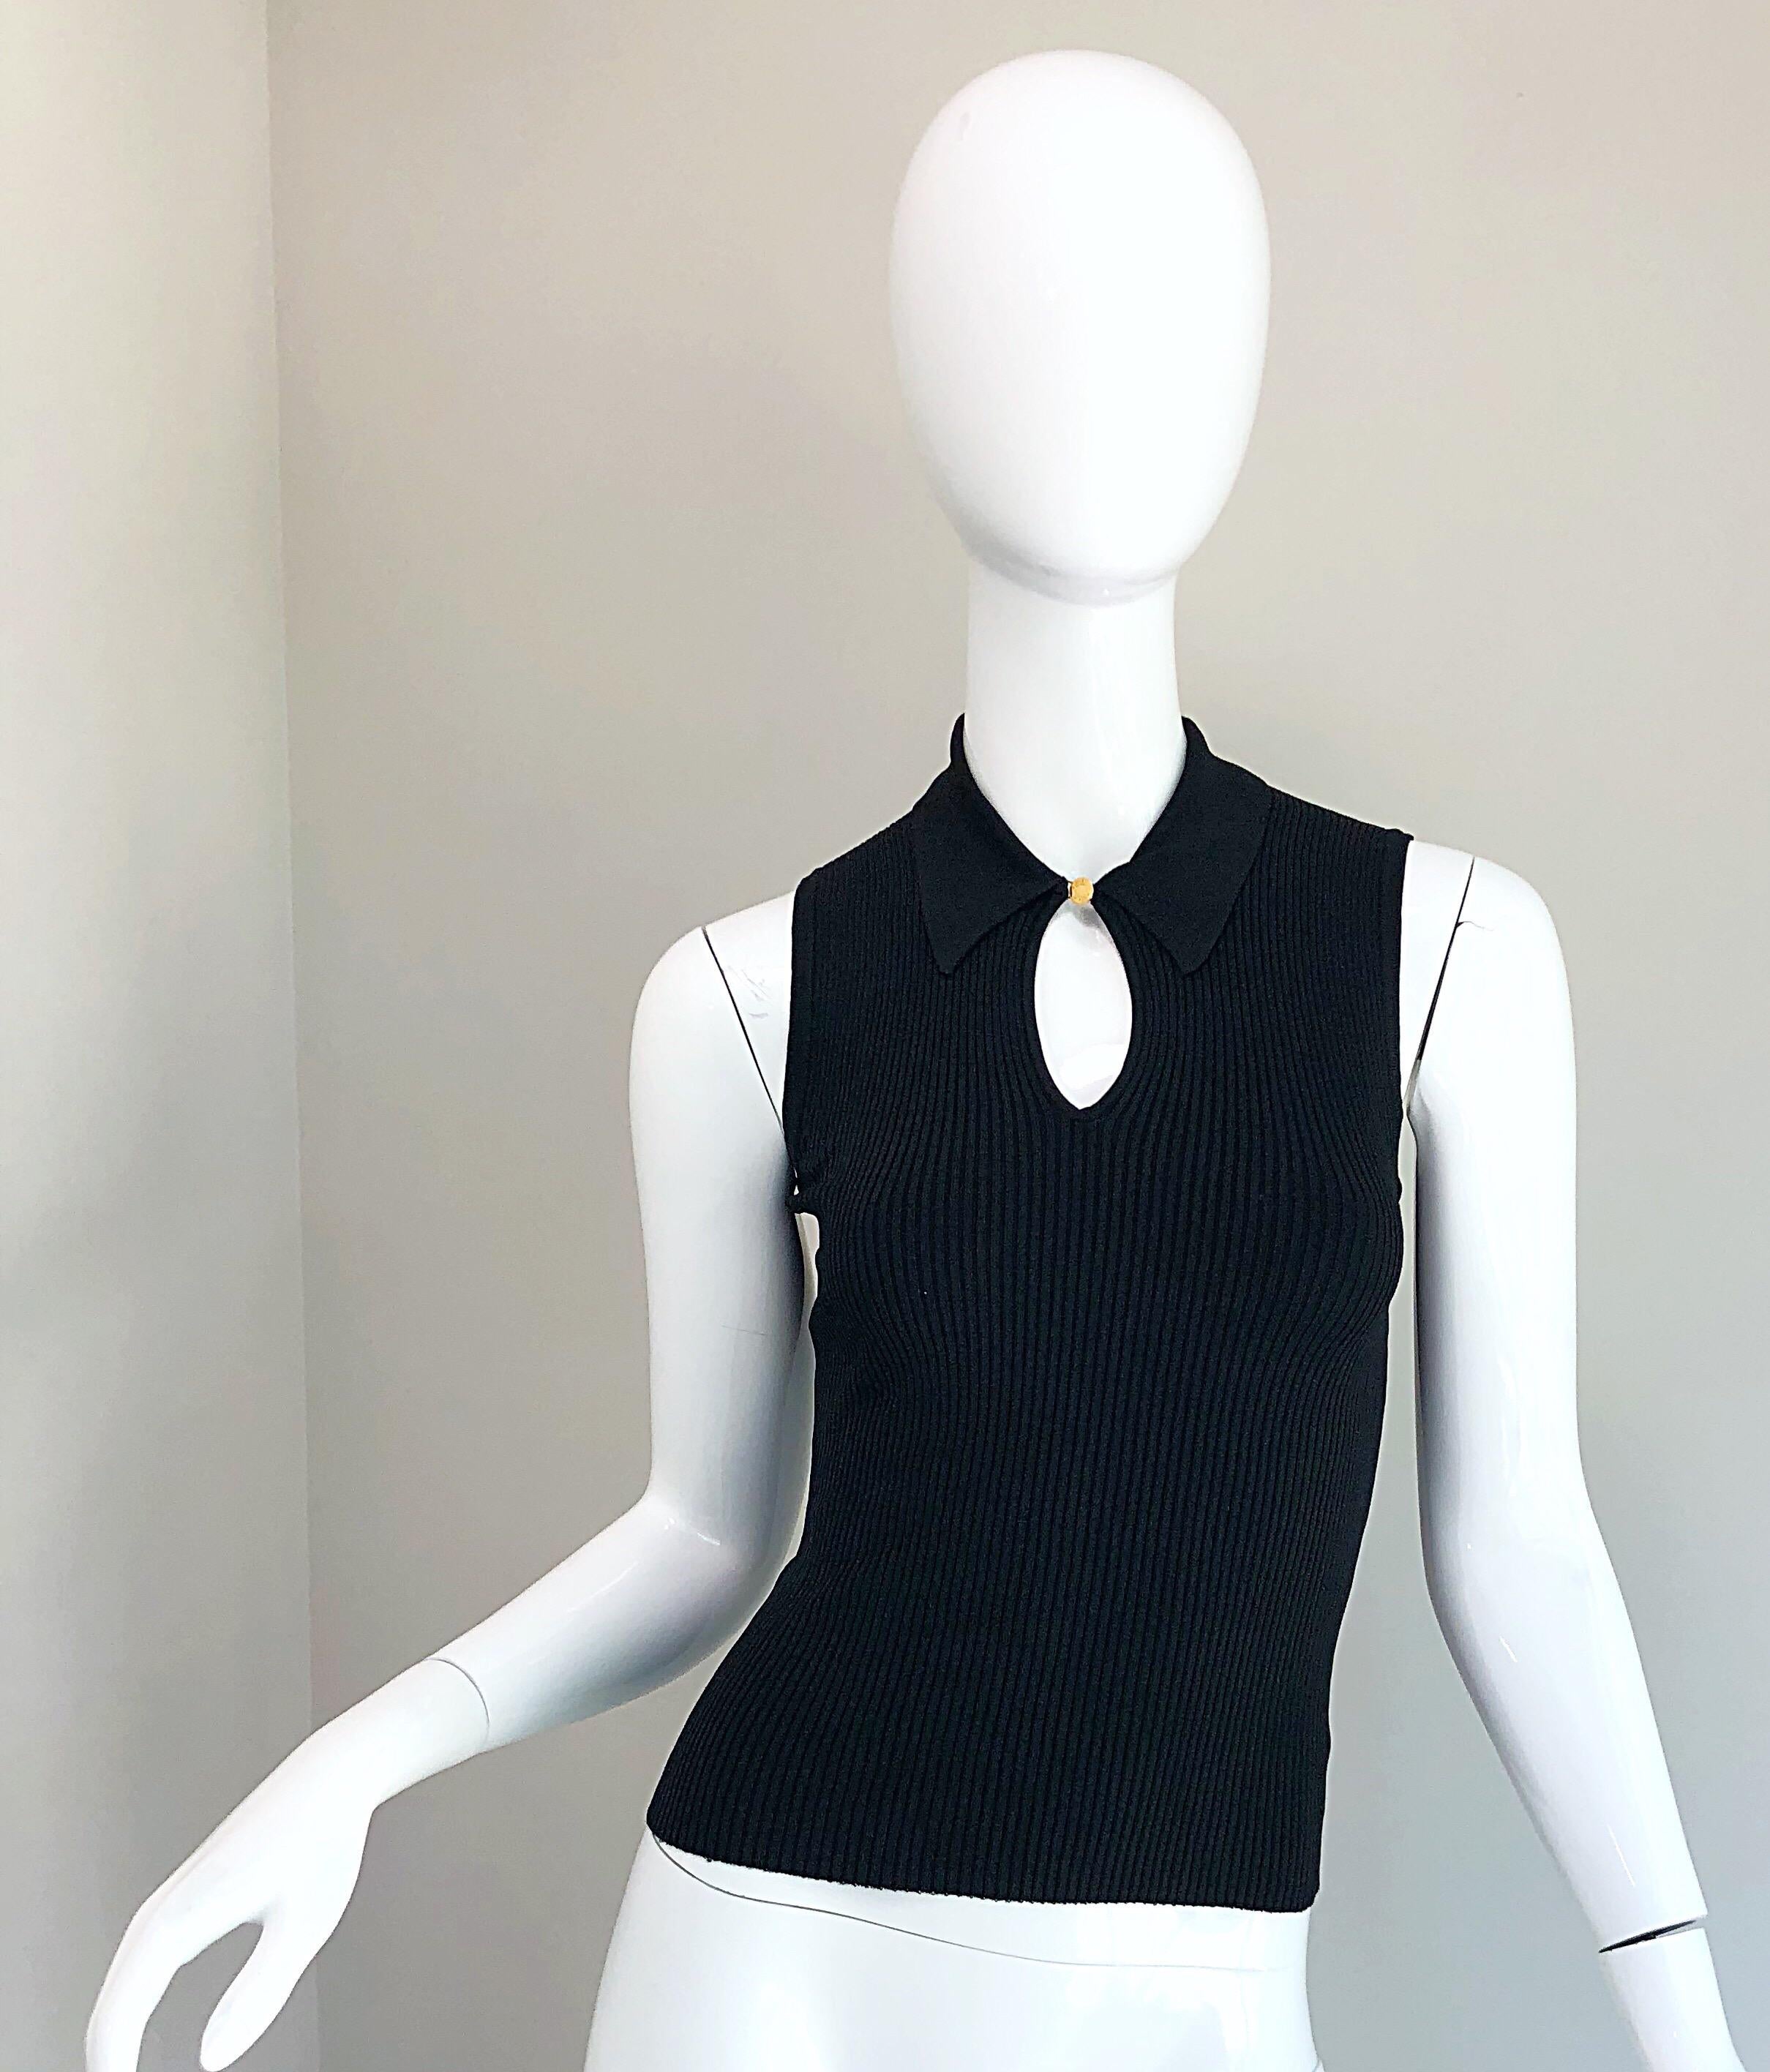 Stylish vintage HERMES black ribbed stretch shirt! Features a single gold logo embossed button at center neck. Simply slips over the head. The perfect staple piece that can easily be dressed up or down. The pictured 1990s KRIZIA rhinestone encrusted